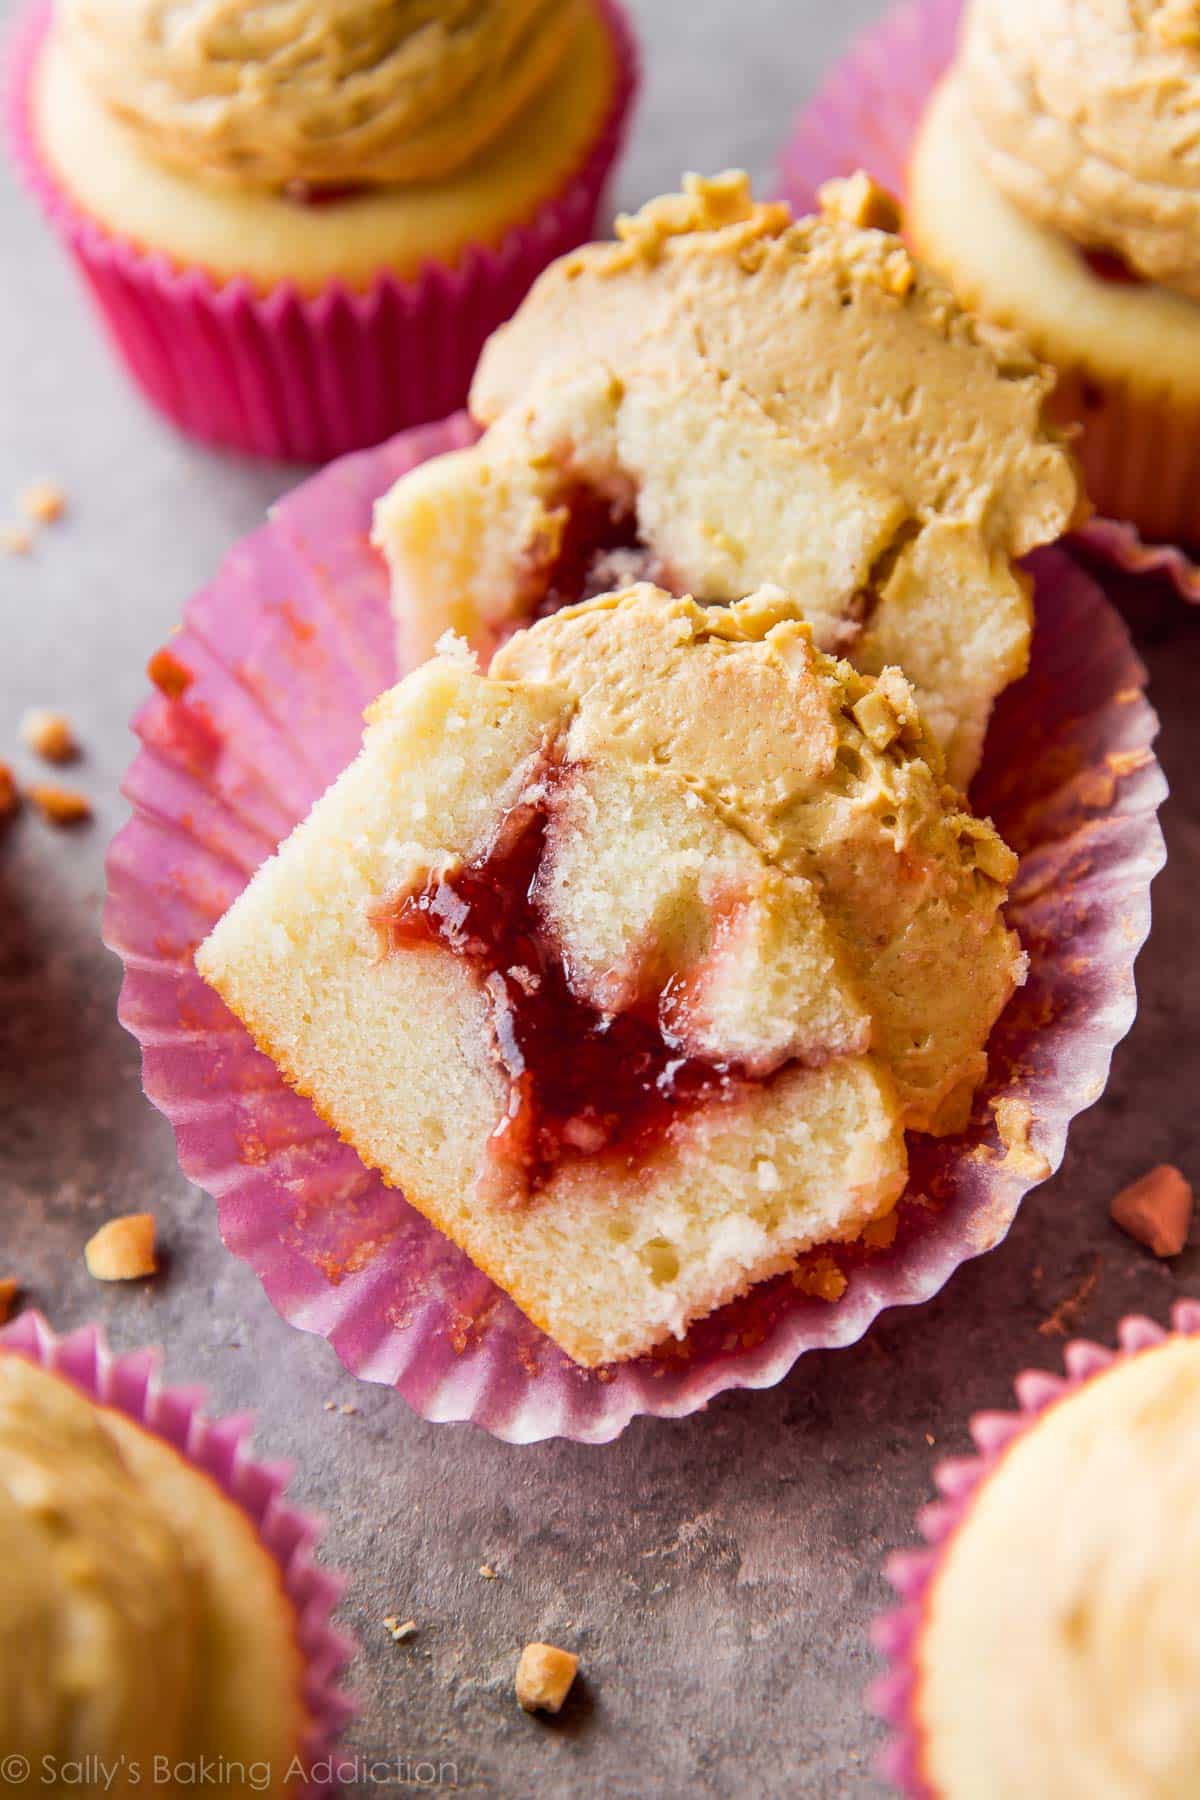 peanut butter and jelly cupcake cut in half showing jam filling